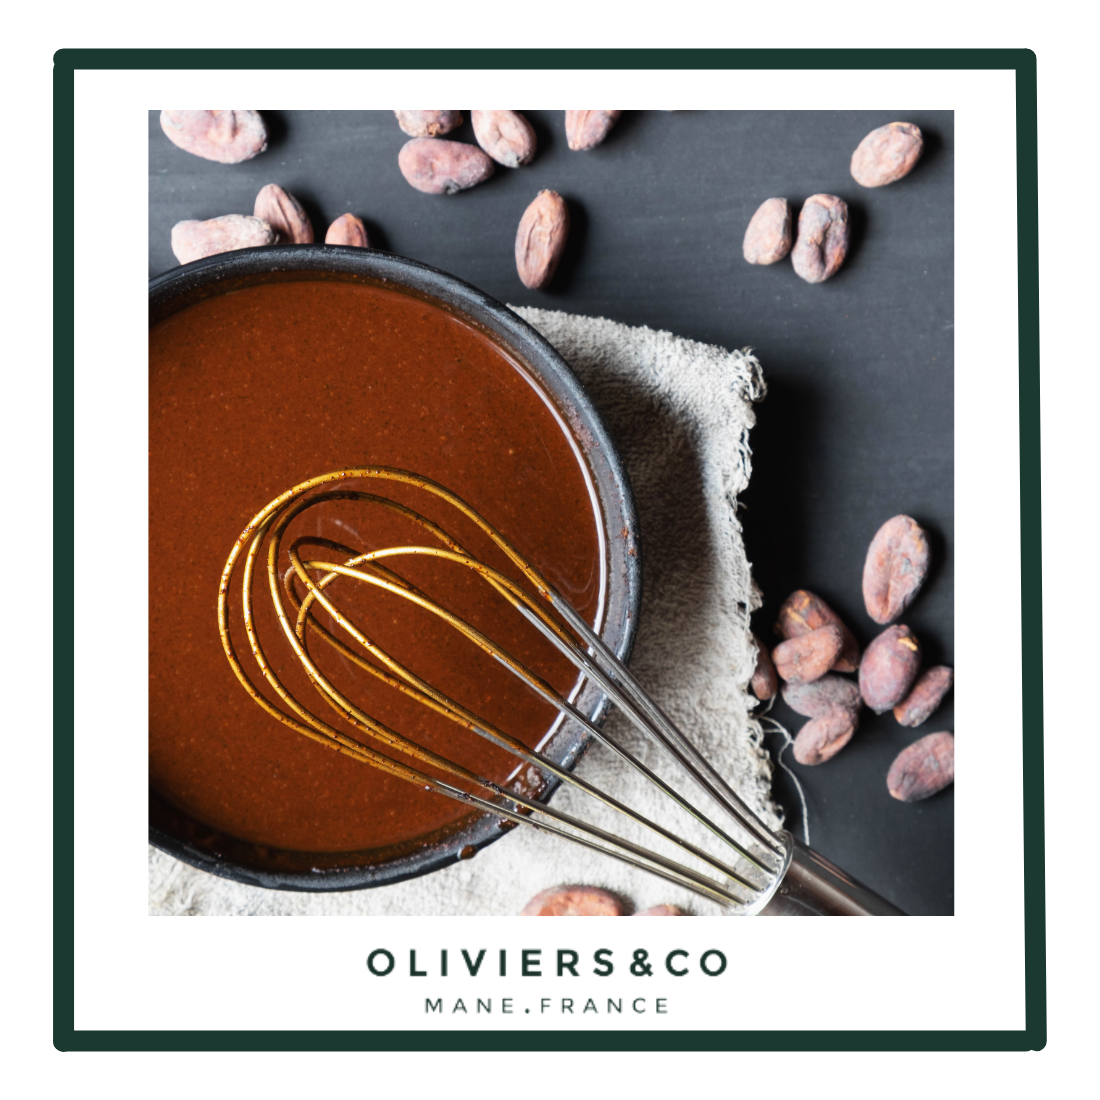 Cooking with Chocolate and Olive Oil: Benefits of Baking 